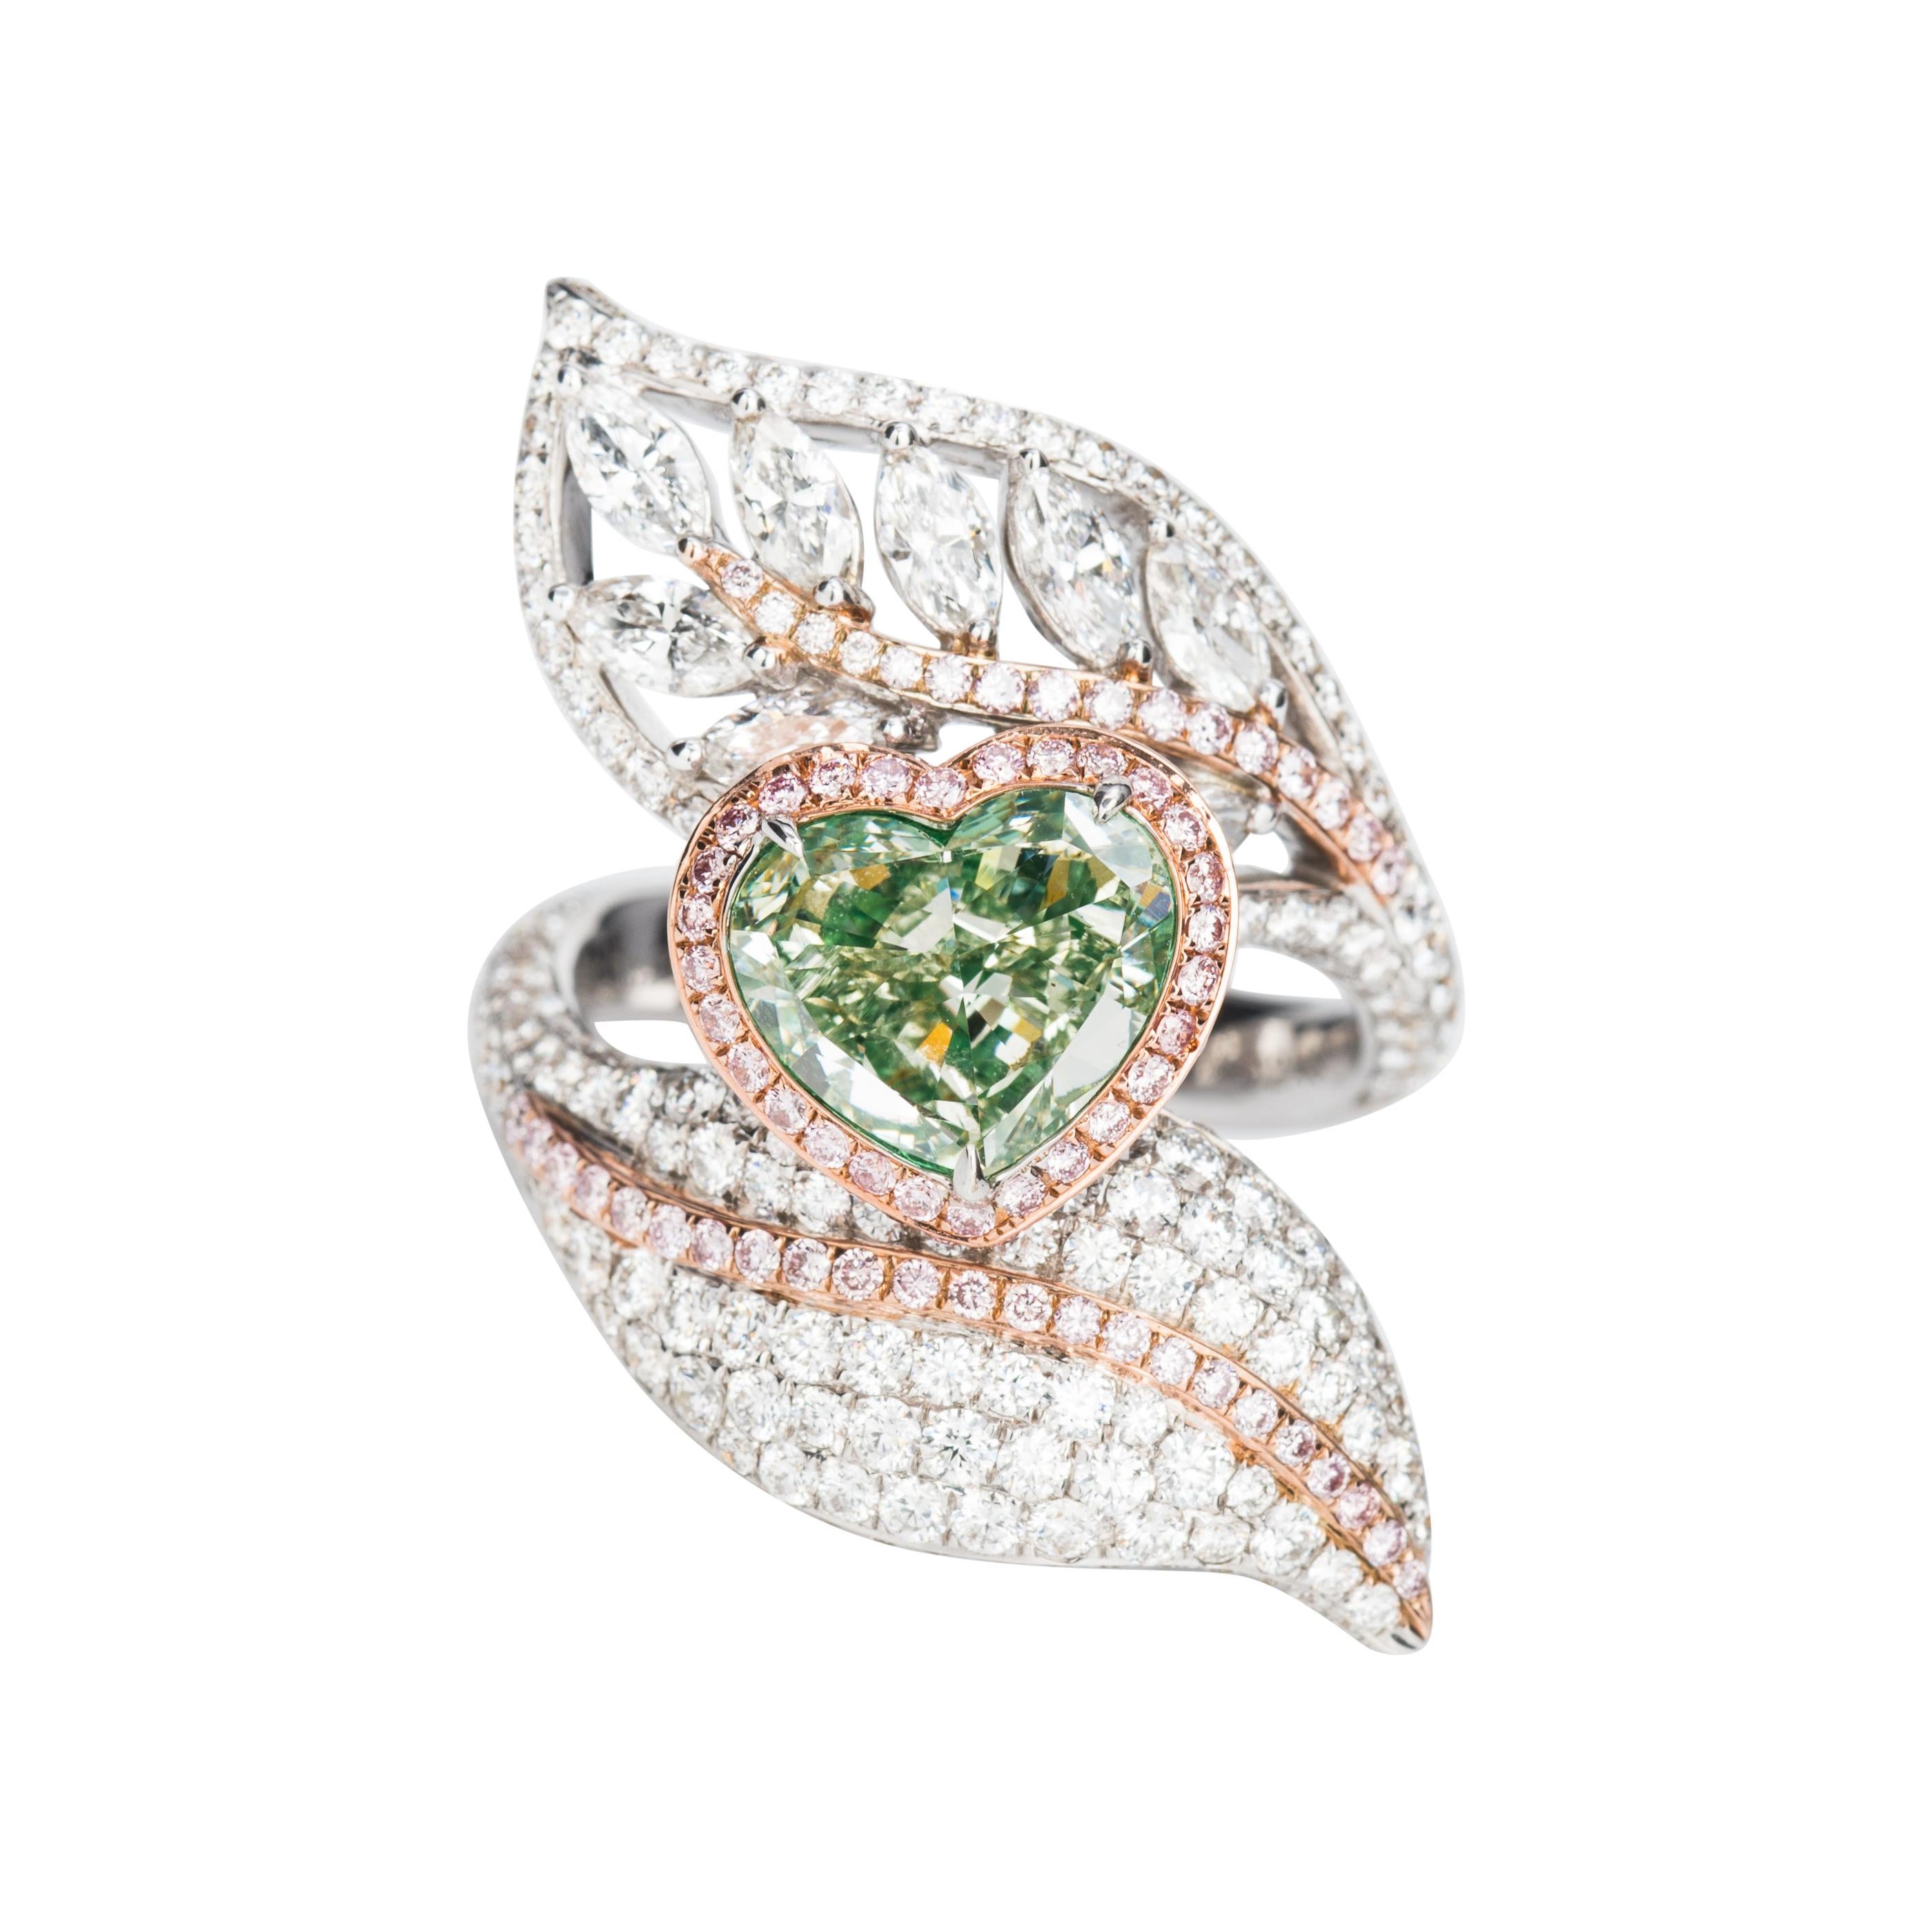 GIA Certified 6.13 Carat Fancy Yellow Green and Pink Diamond Ring in 18k Gold